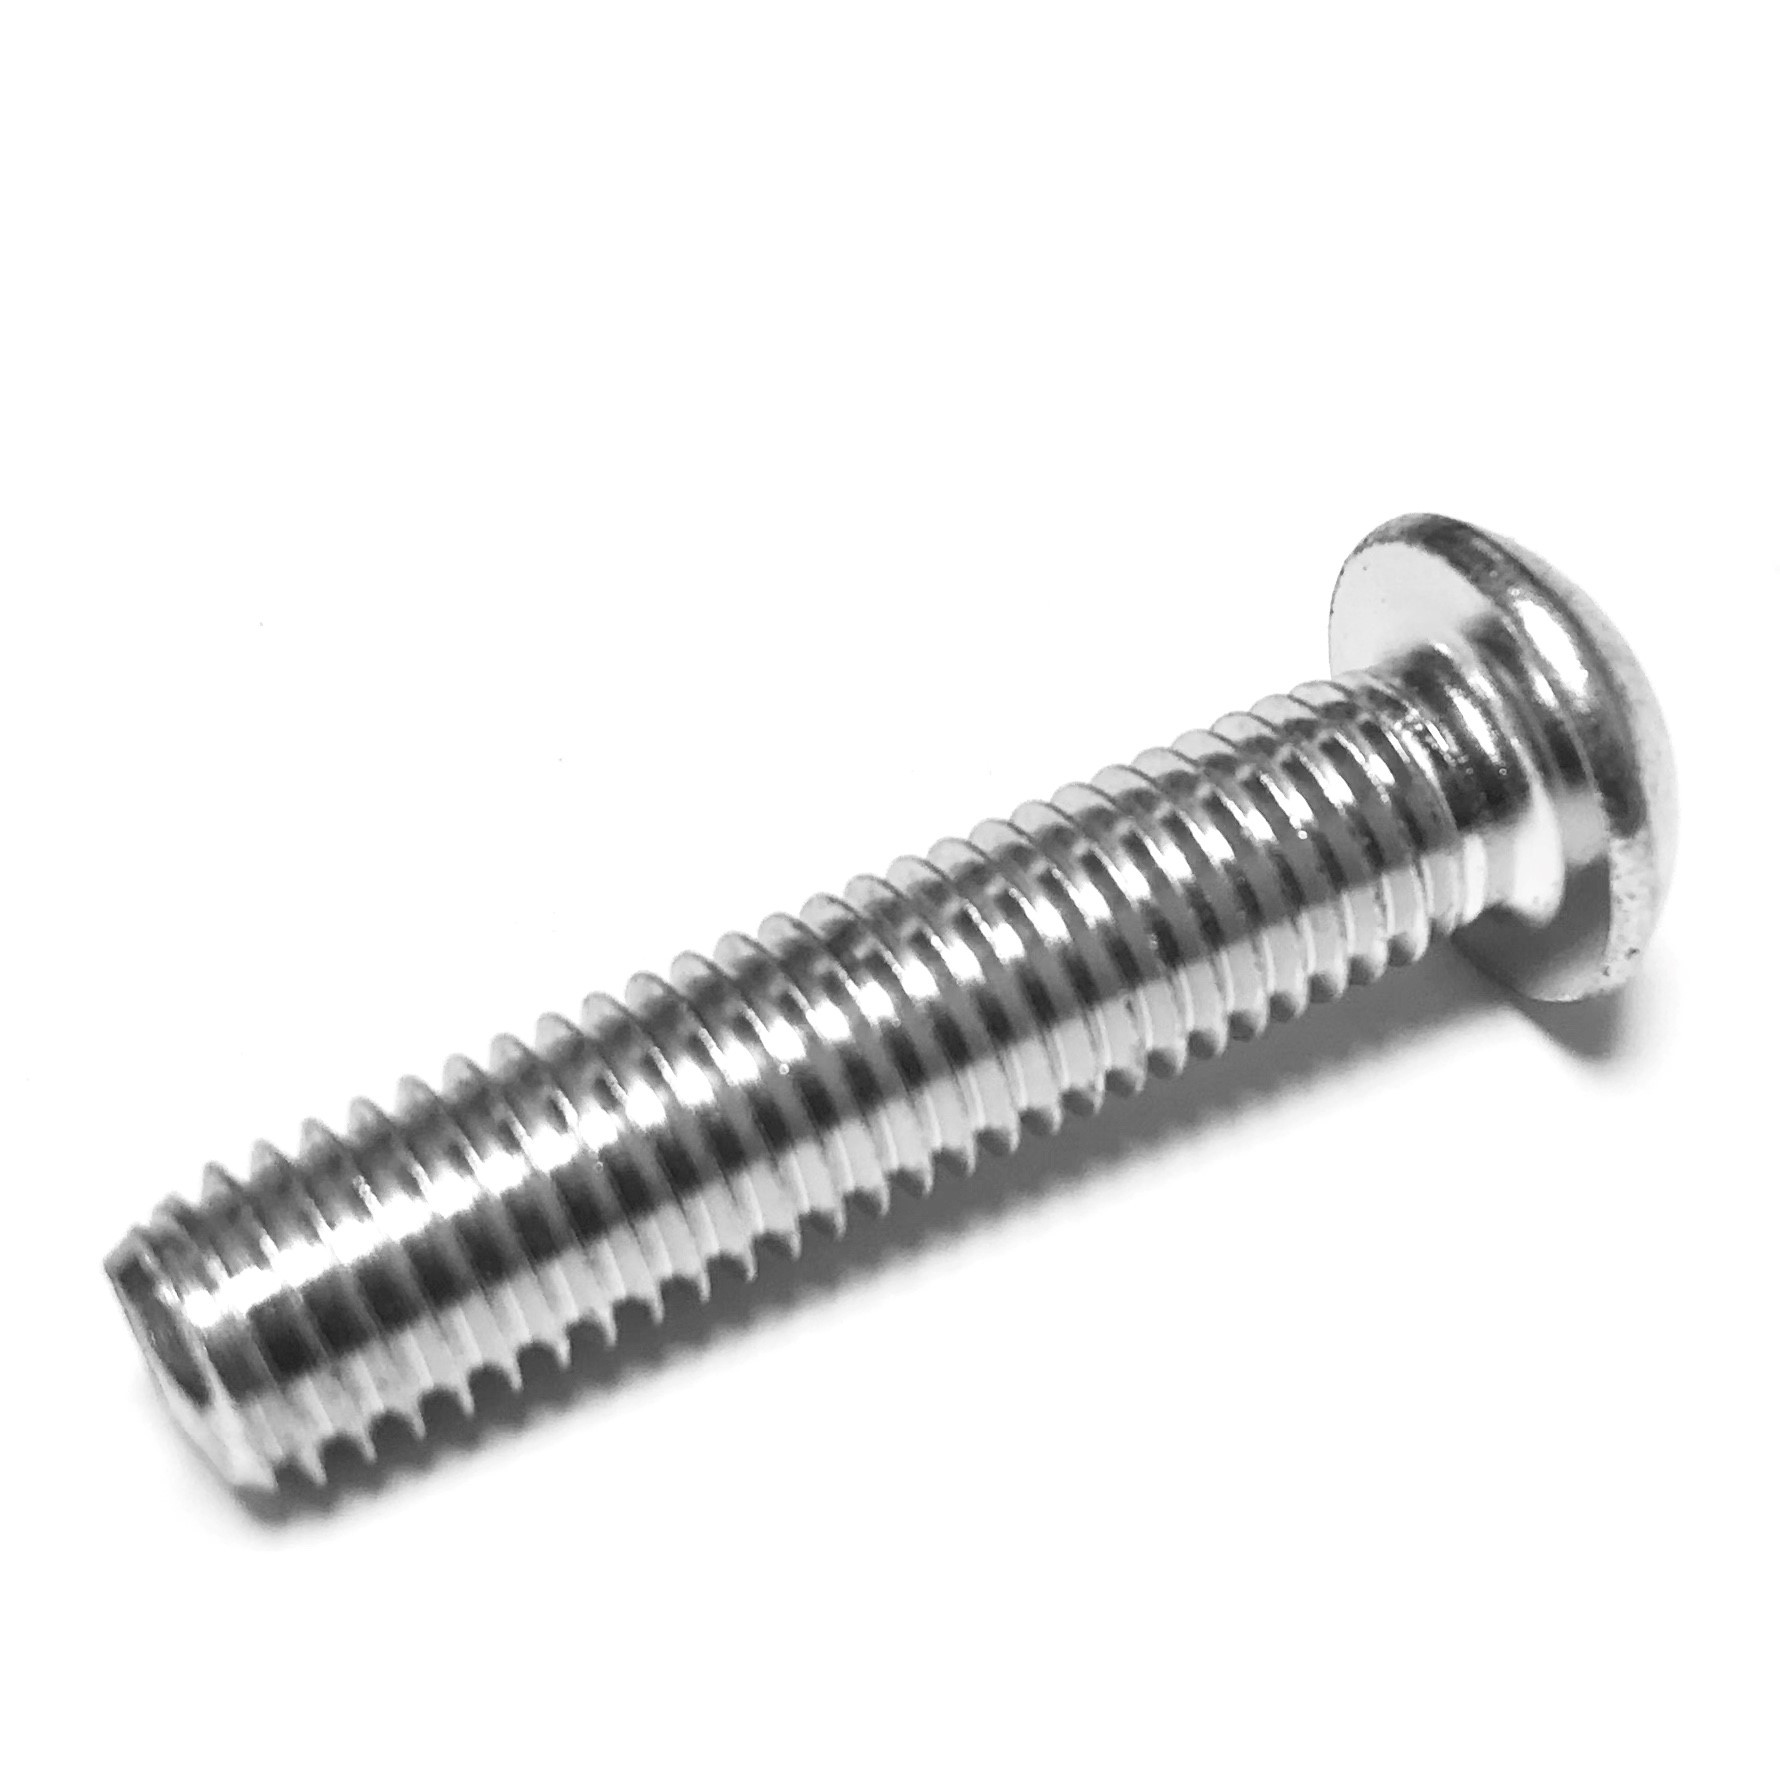 PAJO-BOLTE unbrako bolt 6-kt. BH A2 5X12 500 stk. ISO 7380-1 (7380050124)